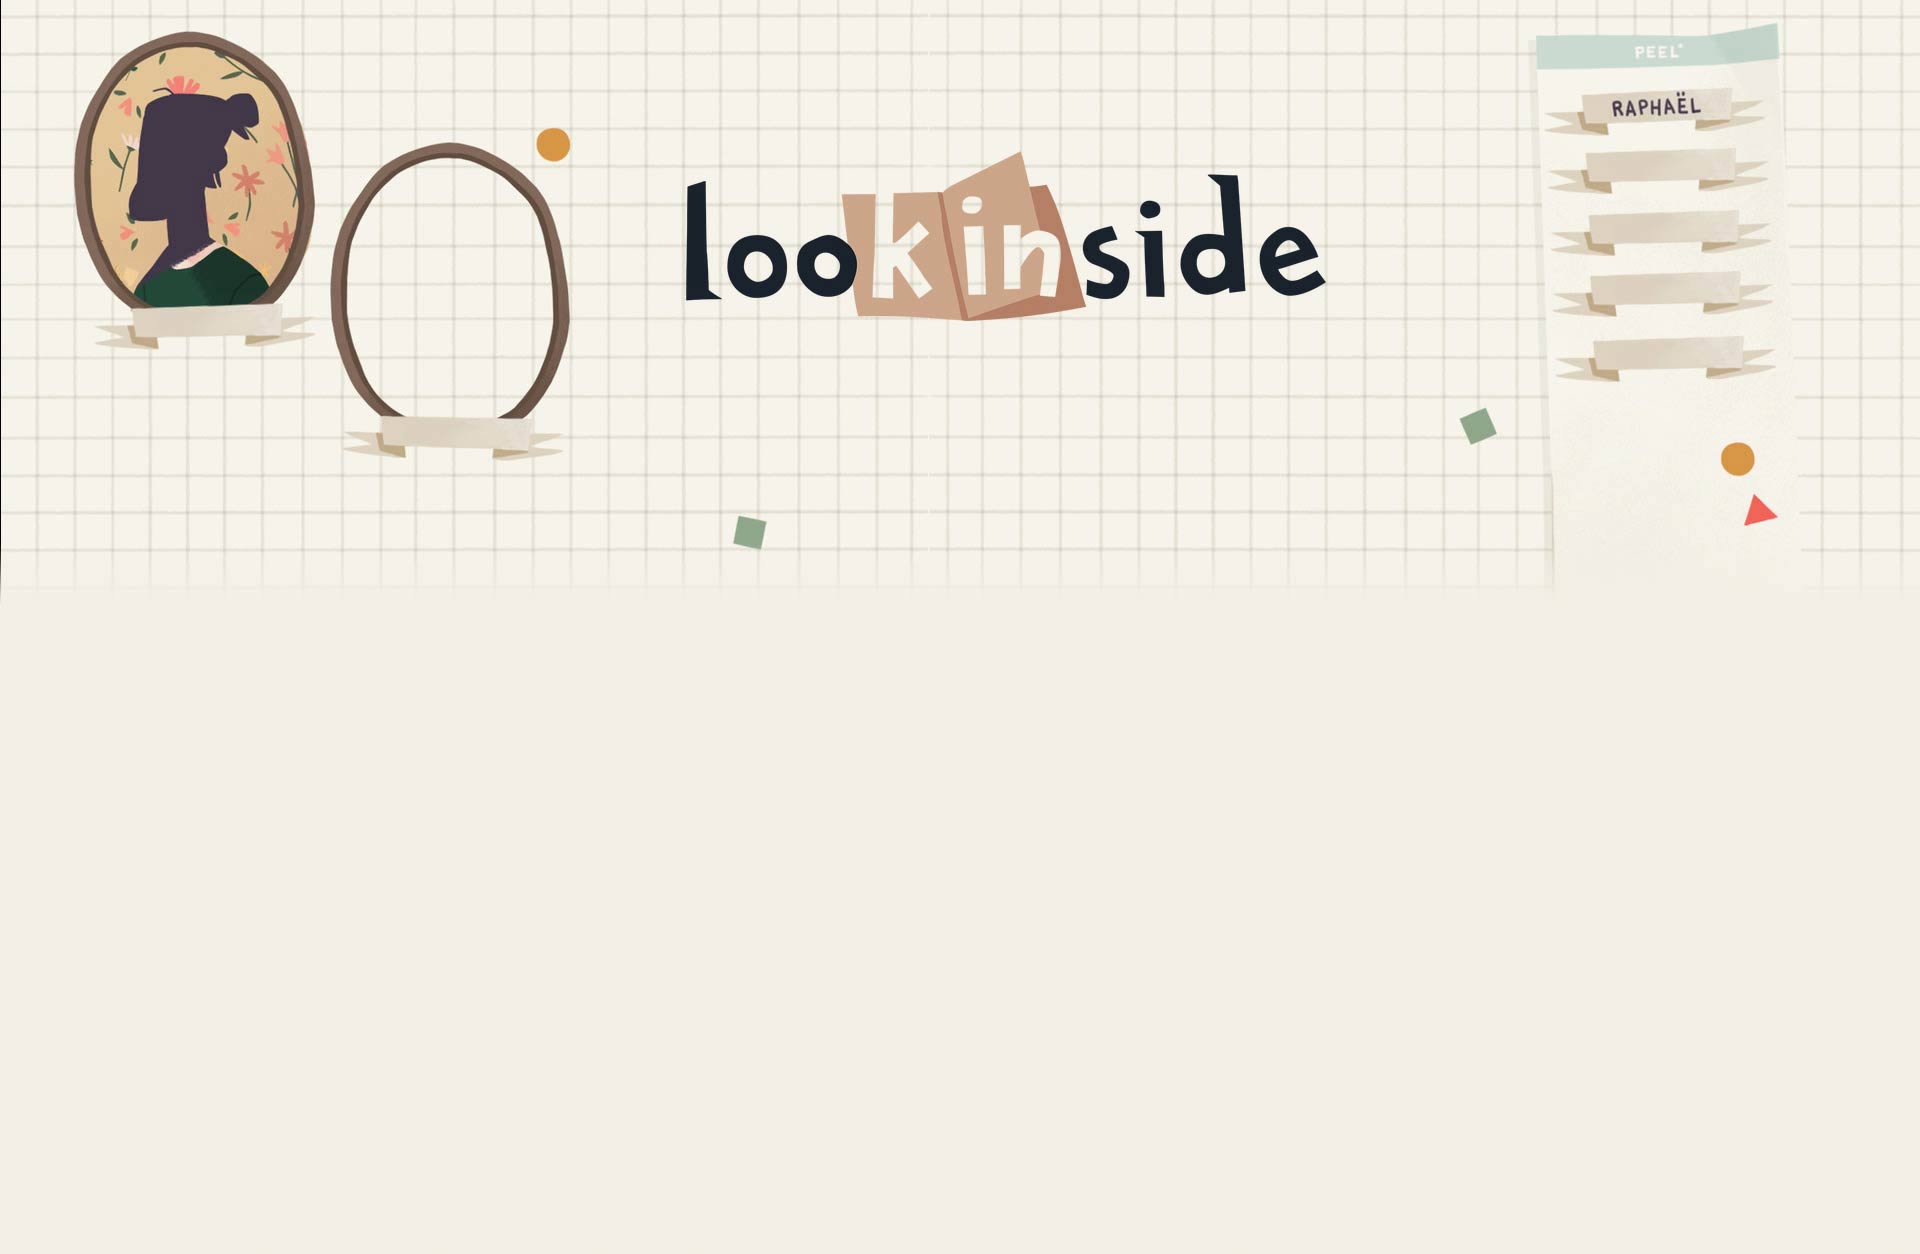 looK INside - Chapter 1